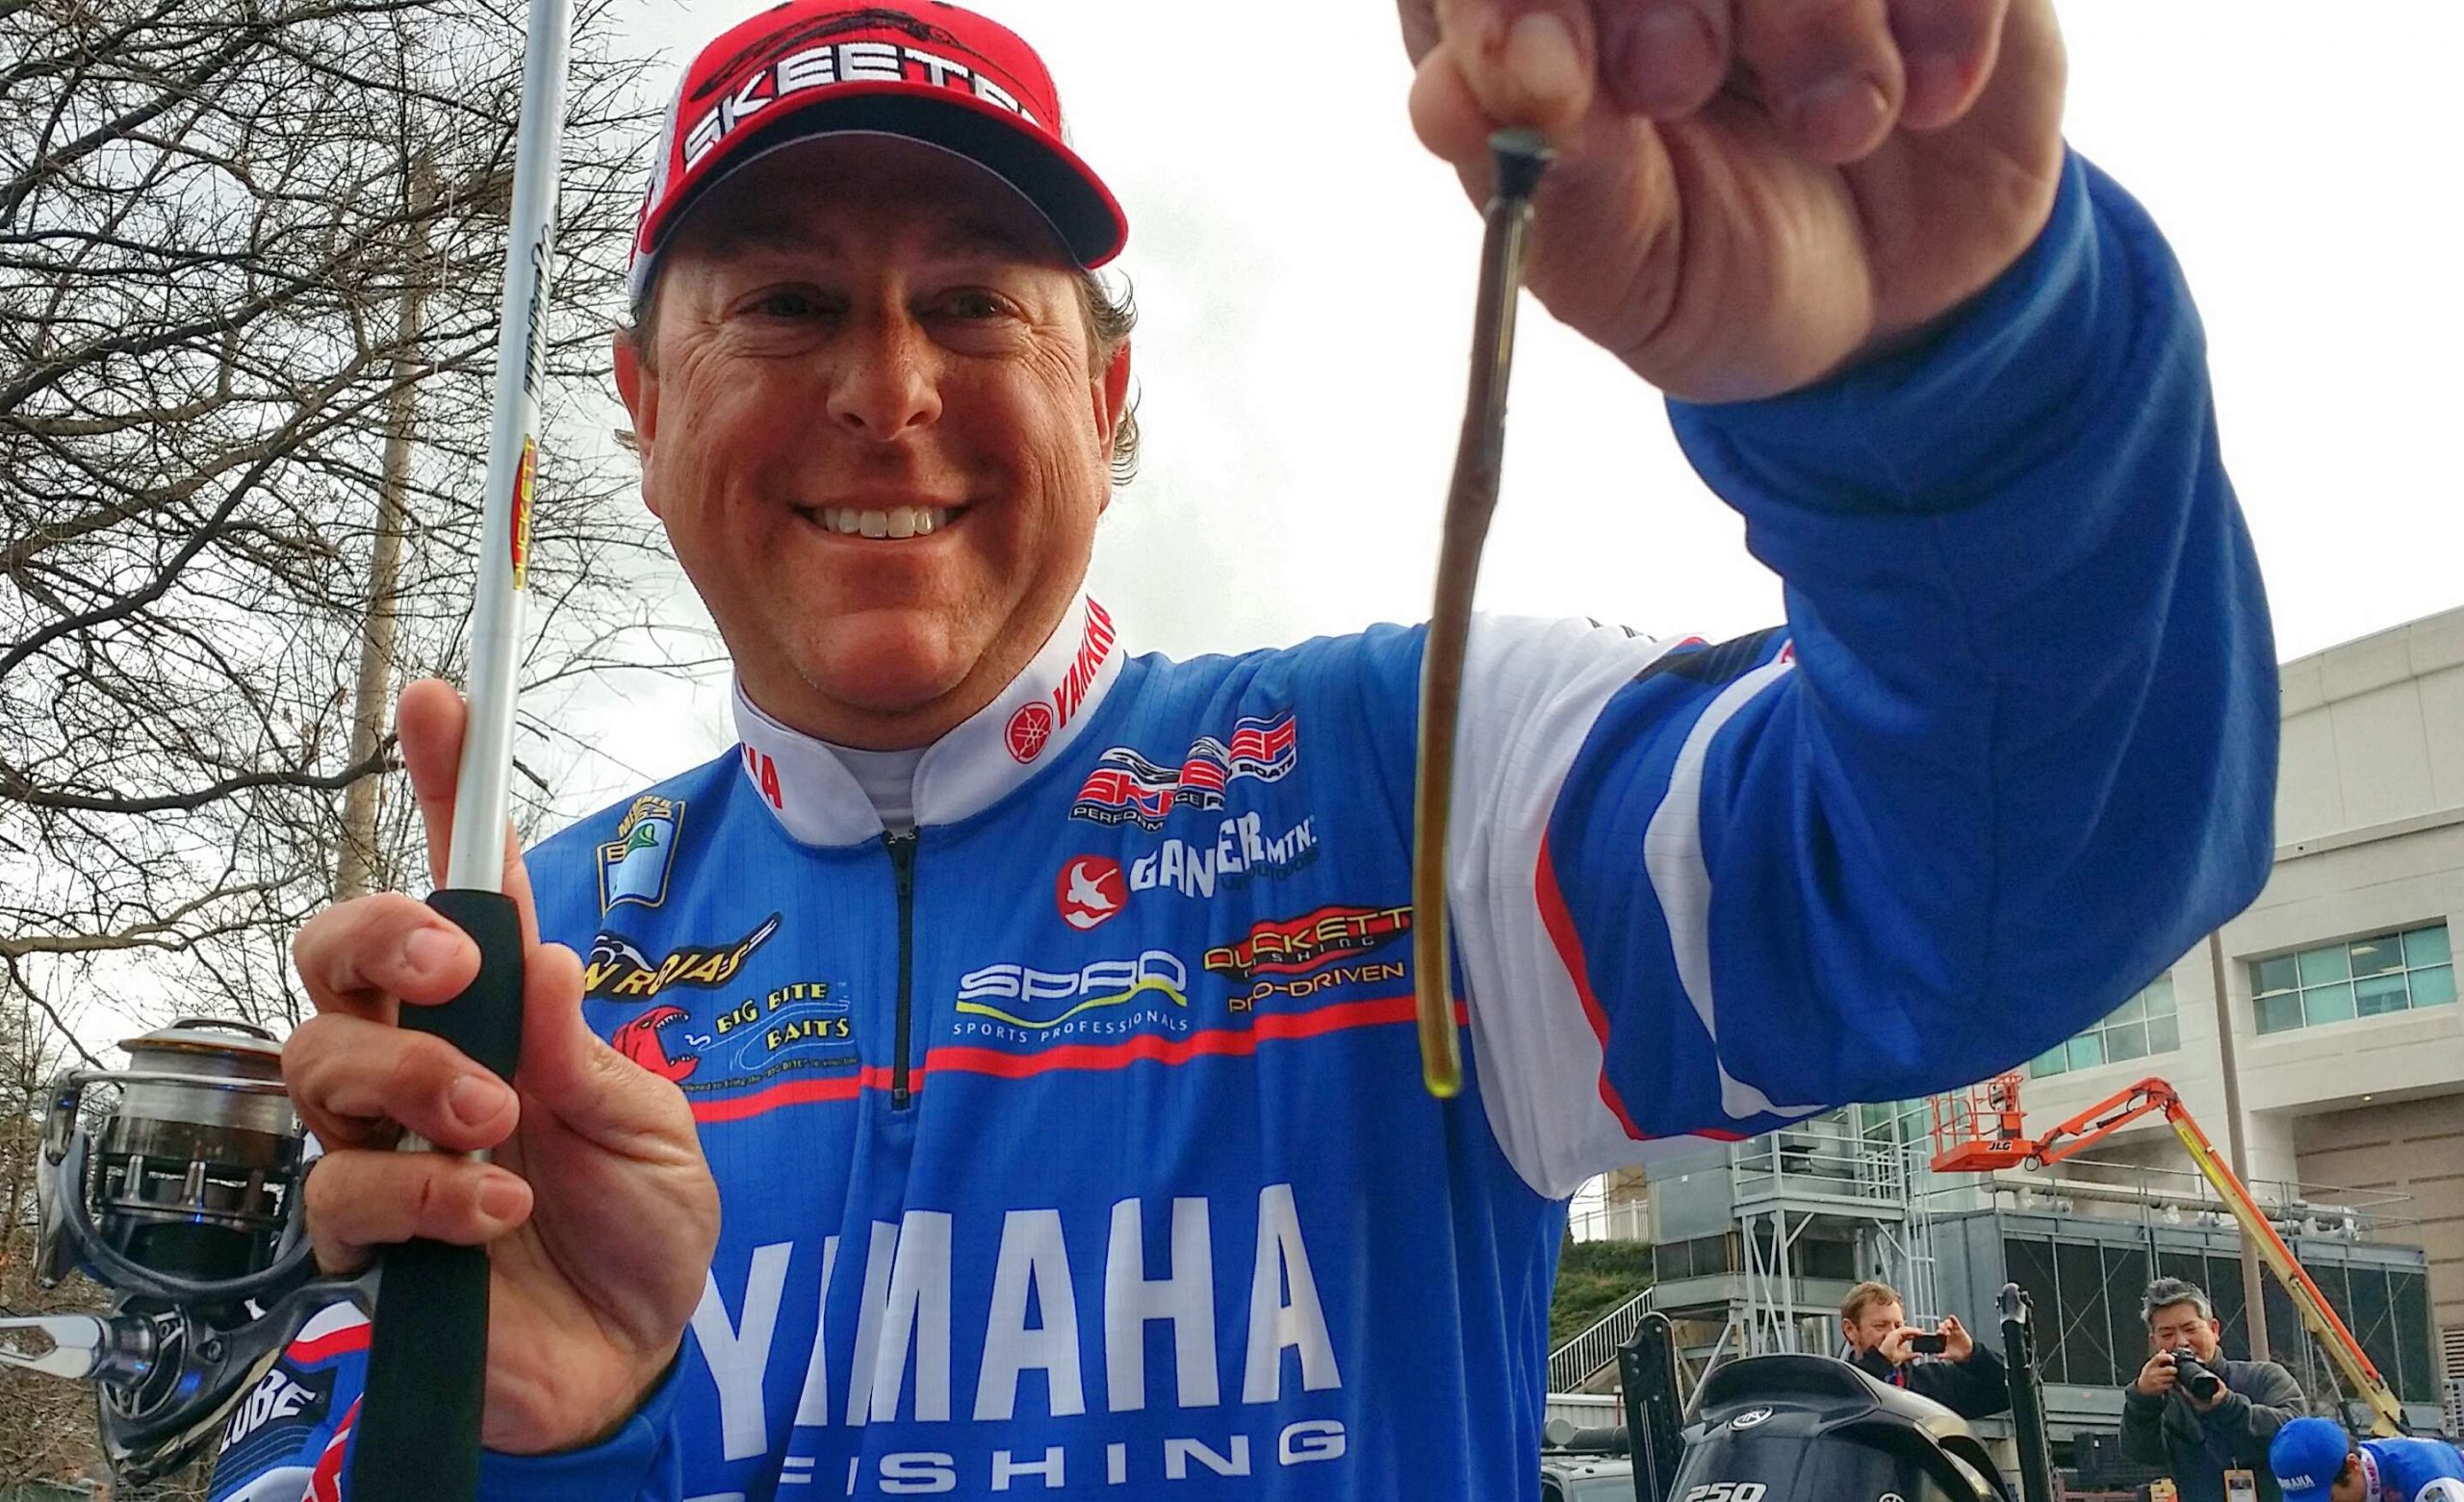 Dean Rojas' dock fish spread out with the cloud cover, but he stuck with his pattern. His main baits were a Big Bite Cane Stick stickbait (brown/purple/green) and a hand-poured worm (green/blue/brown bottom) fished on a 1/8-ounce shaky head. He said he wasn't doing anything special â 